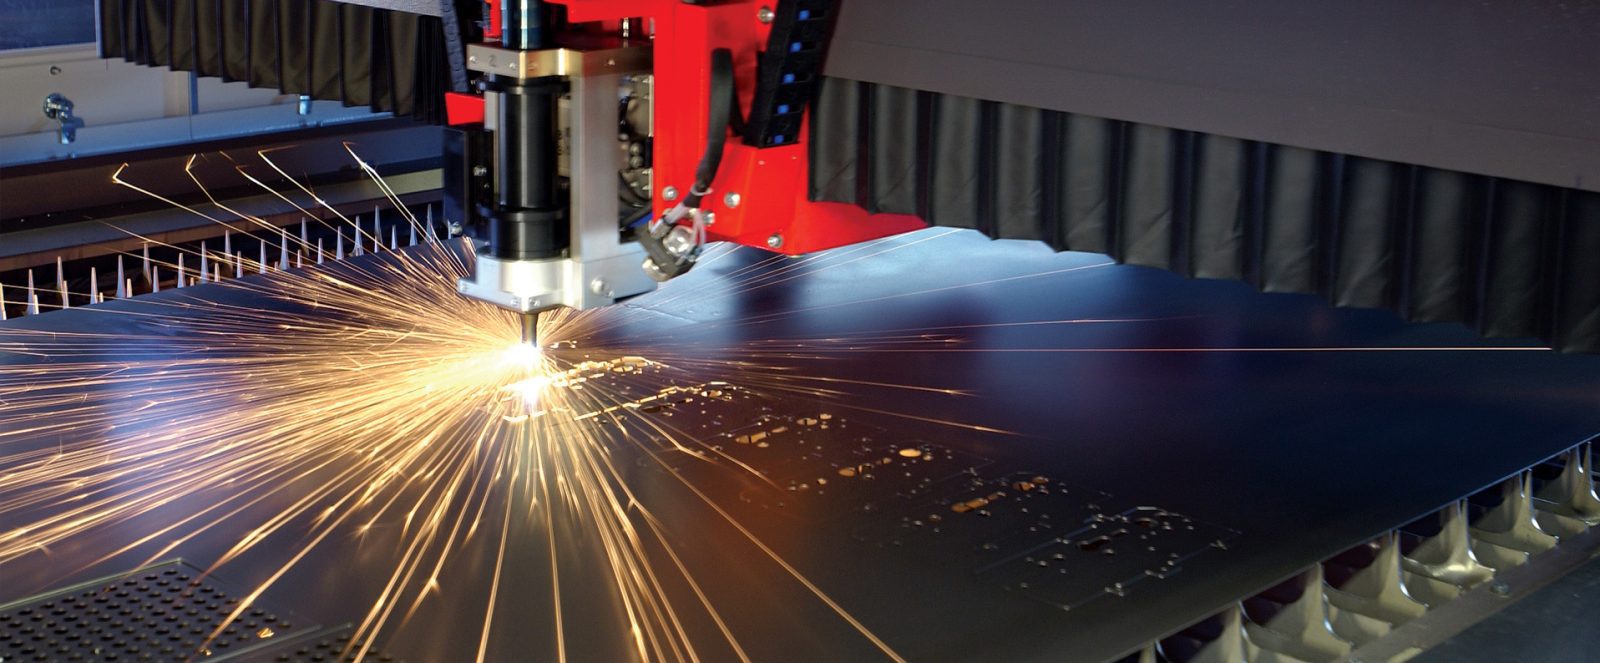 Why Use Stainless Steel For Your Laser Cutting Project?